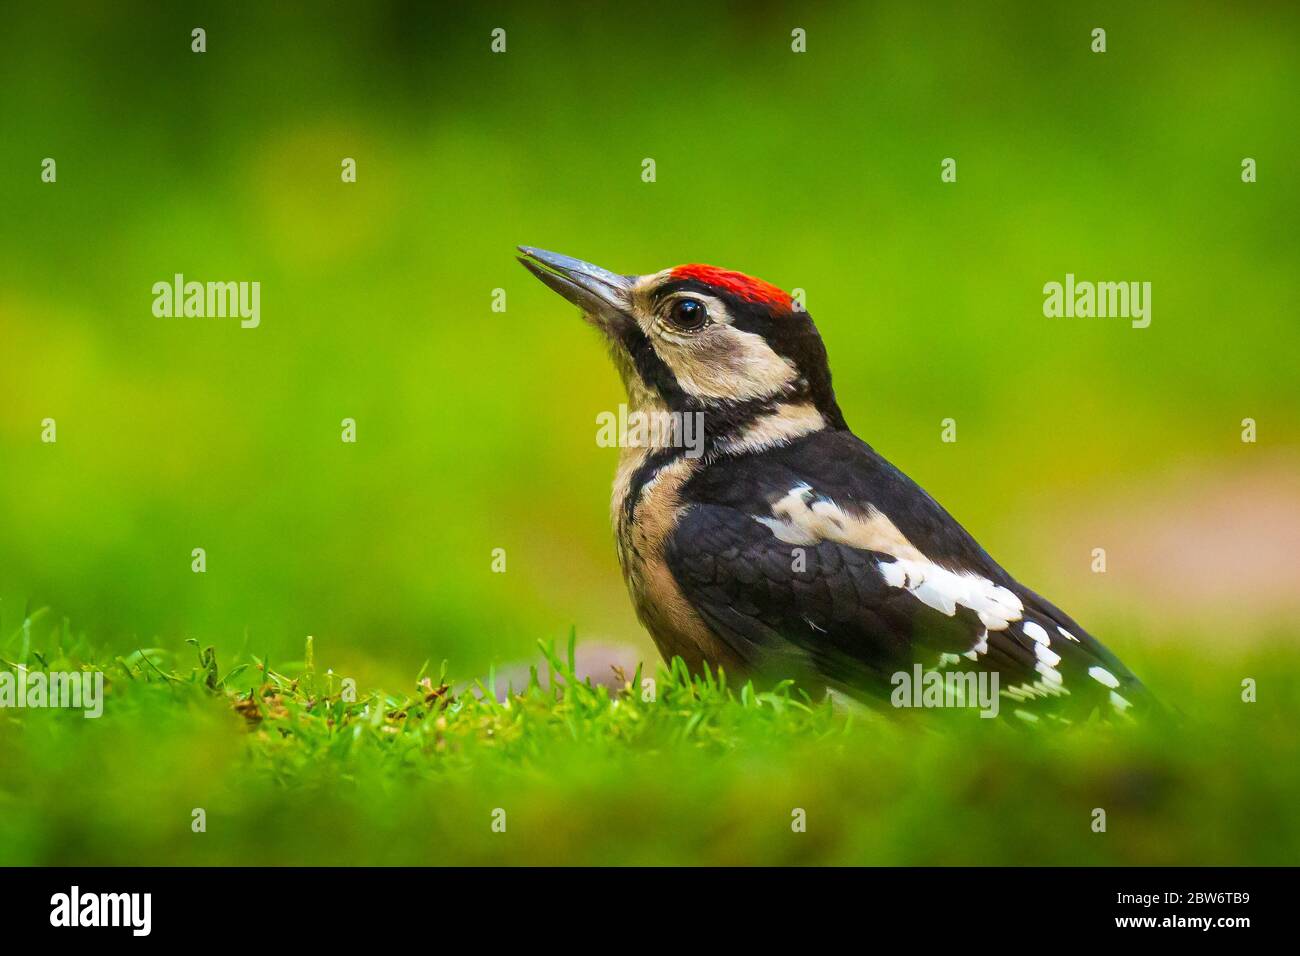 Closeup of a great spotted woodpecker bird, Dendrocopos major, perched on the forest floor Stock Photo